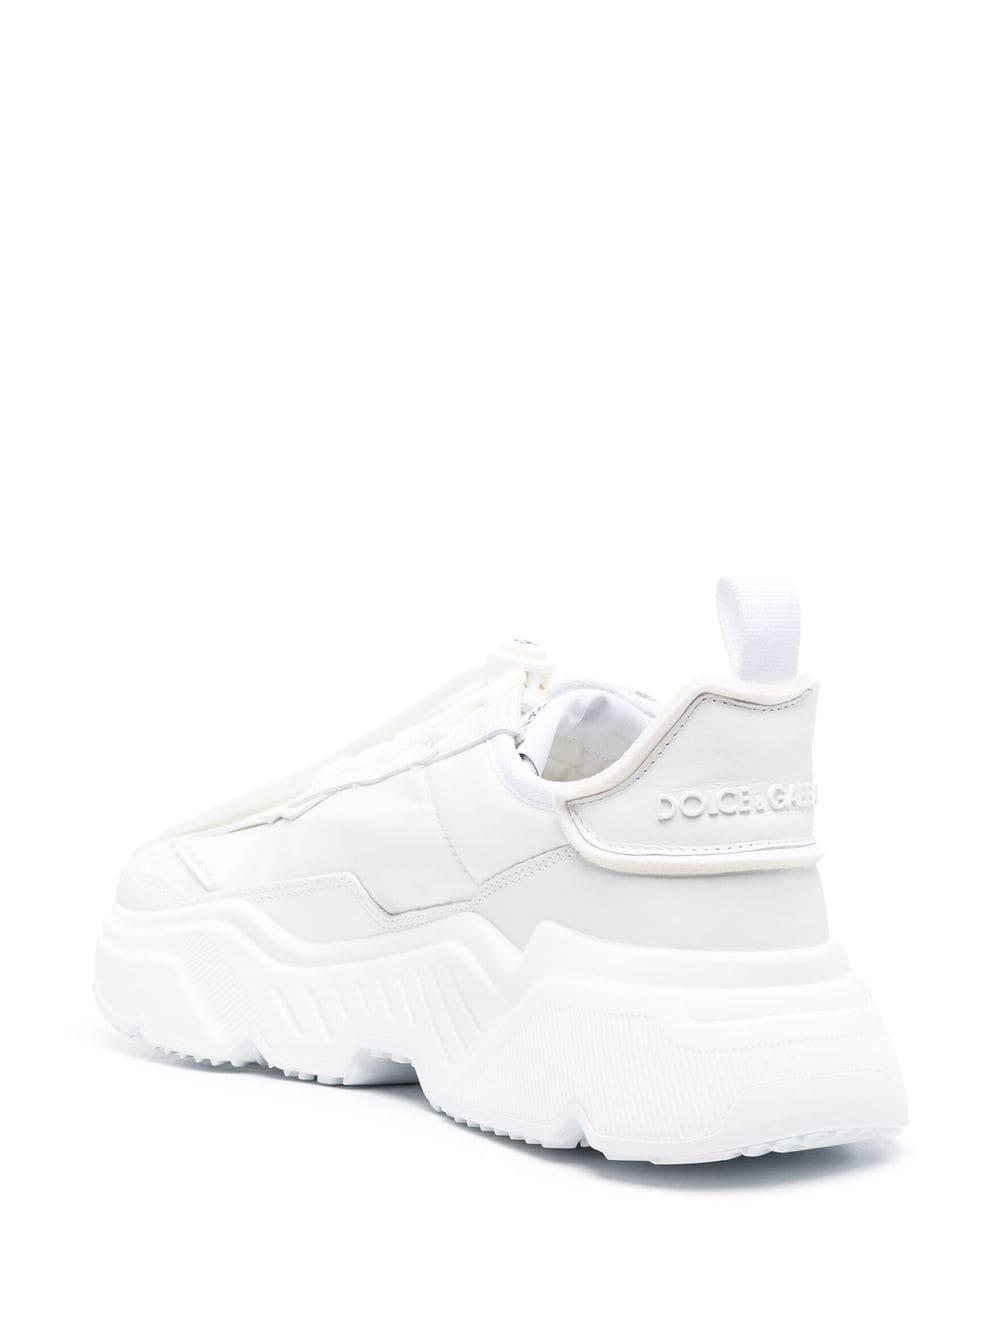 Dolce & Gabbana Daymaster Sneakers in White | Lyst